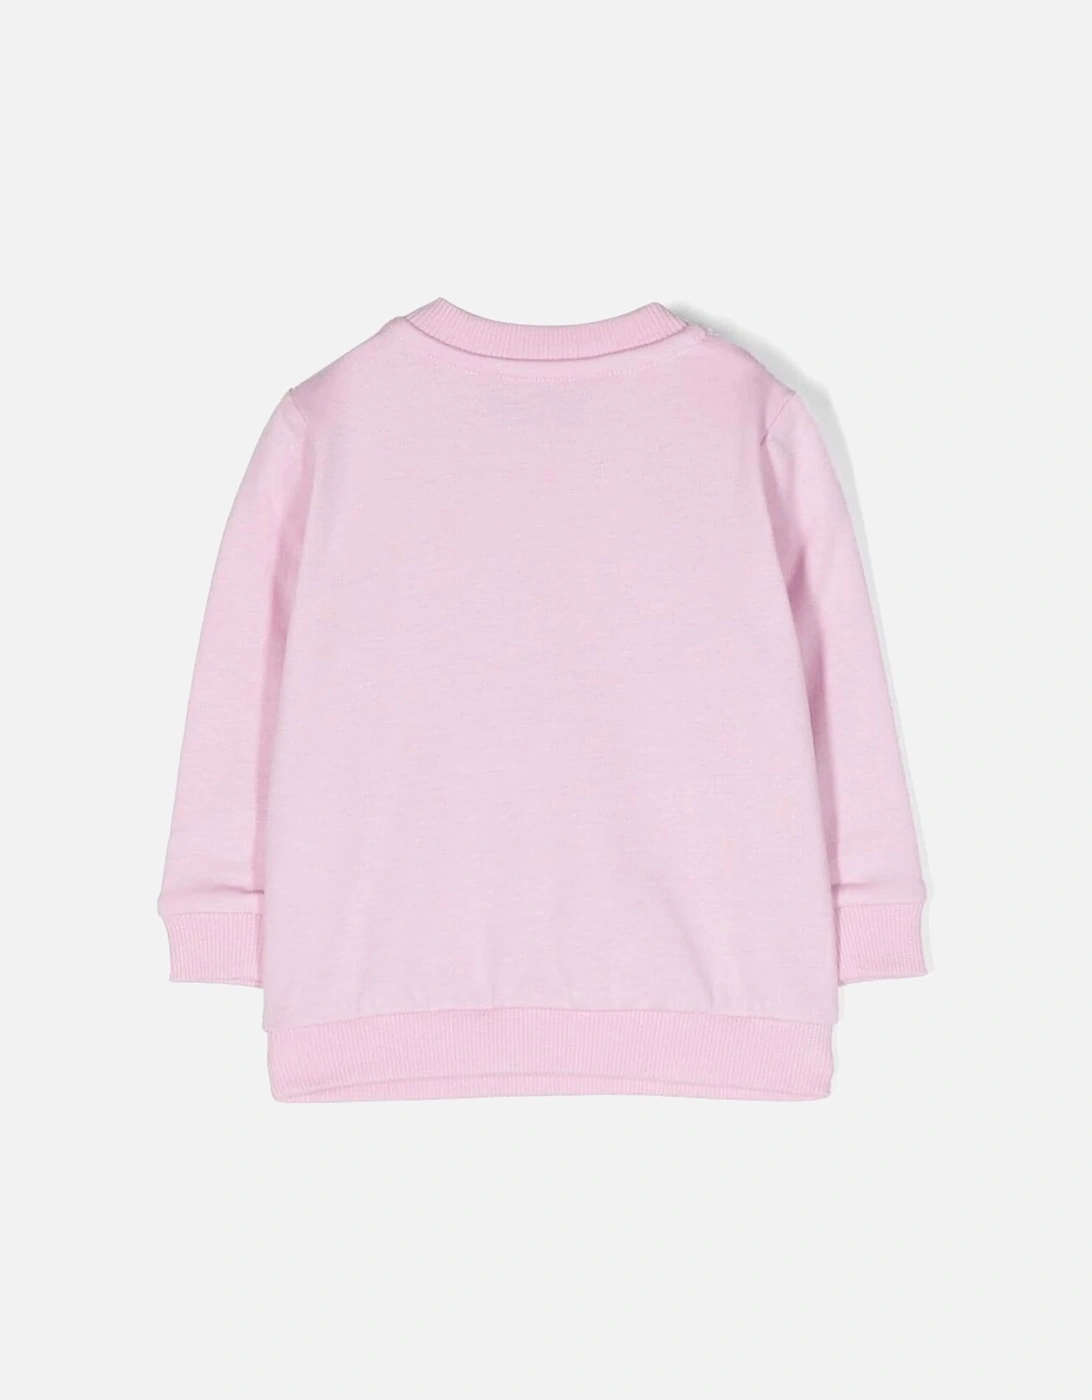 Baby Girls Teddy Sweater in Pink